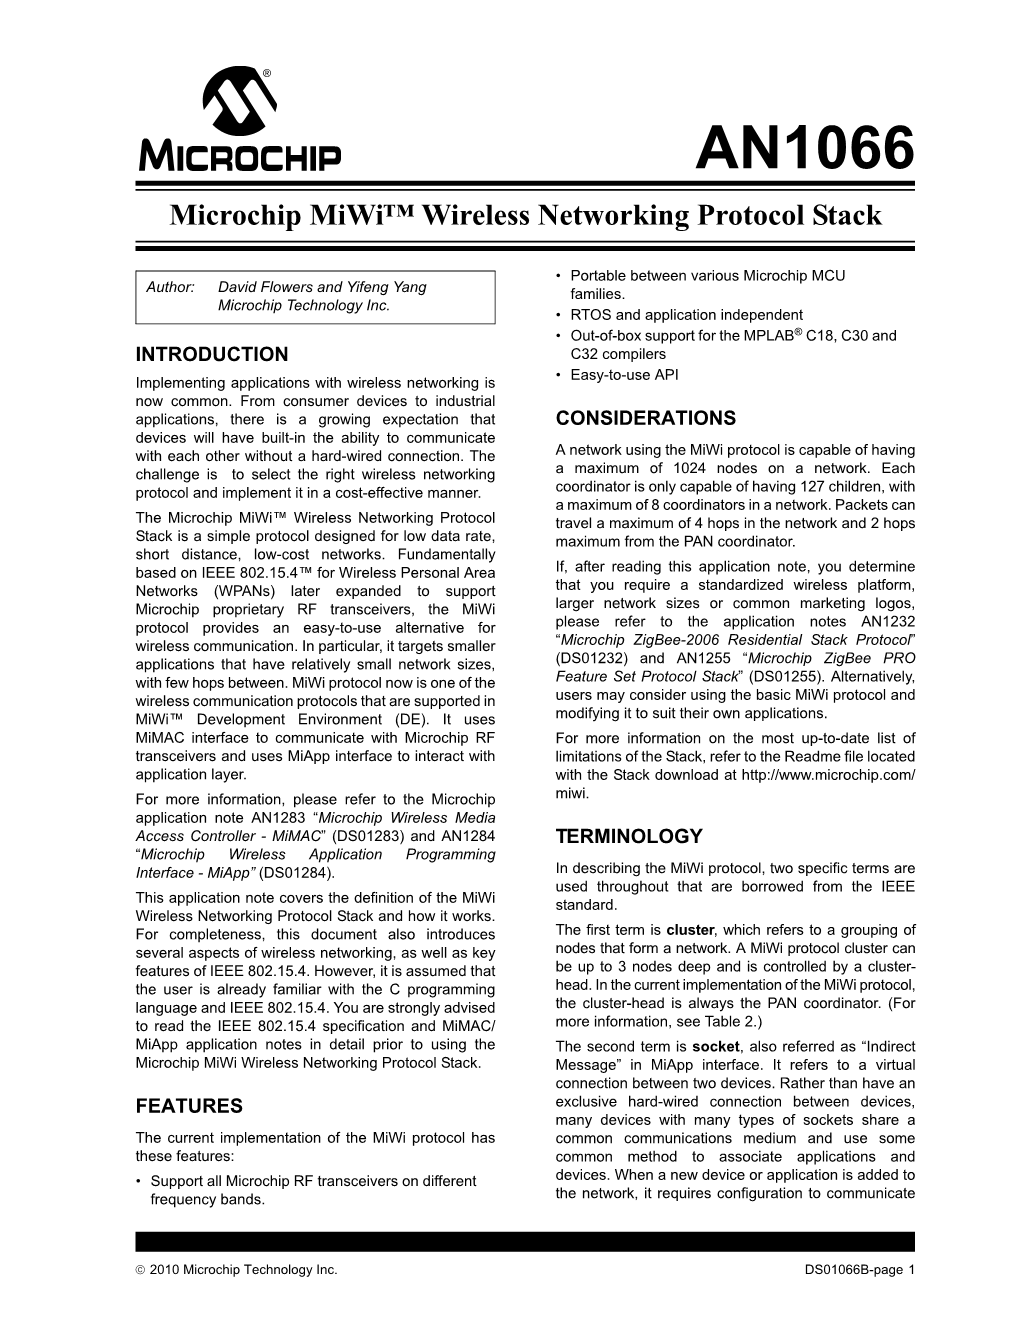 AN1066 Microchip Miwi Wireless Network Protocol Stack